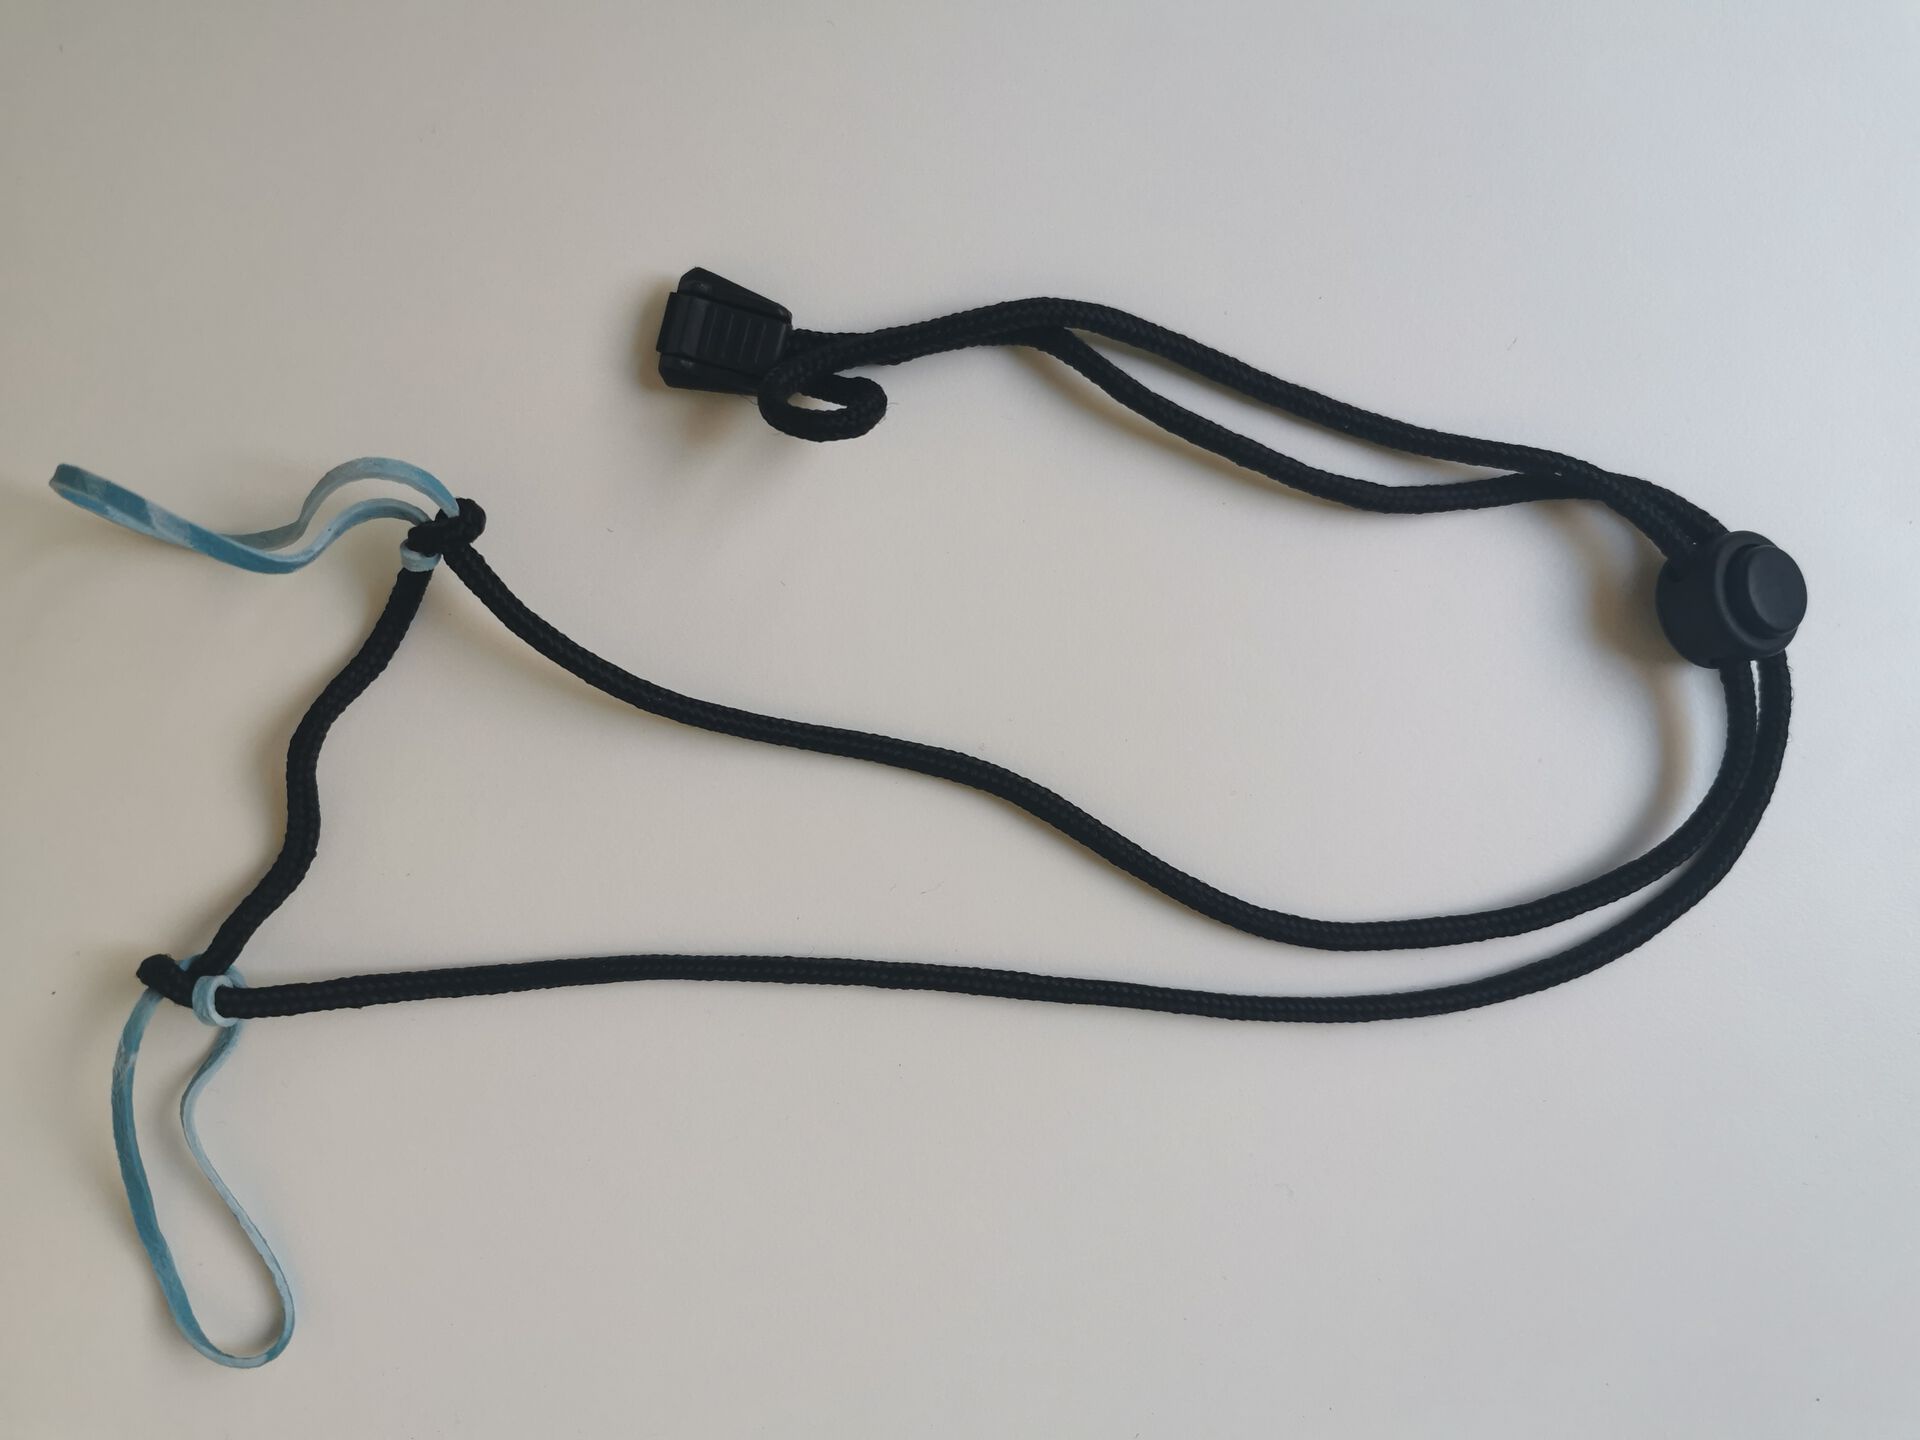 lanyard with two elastic bands attached